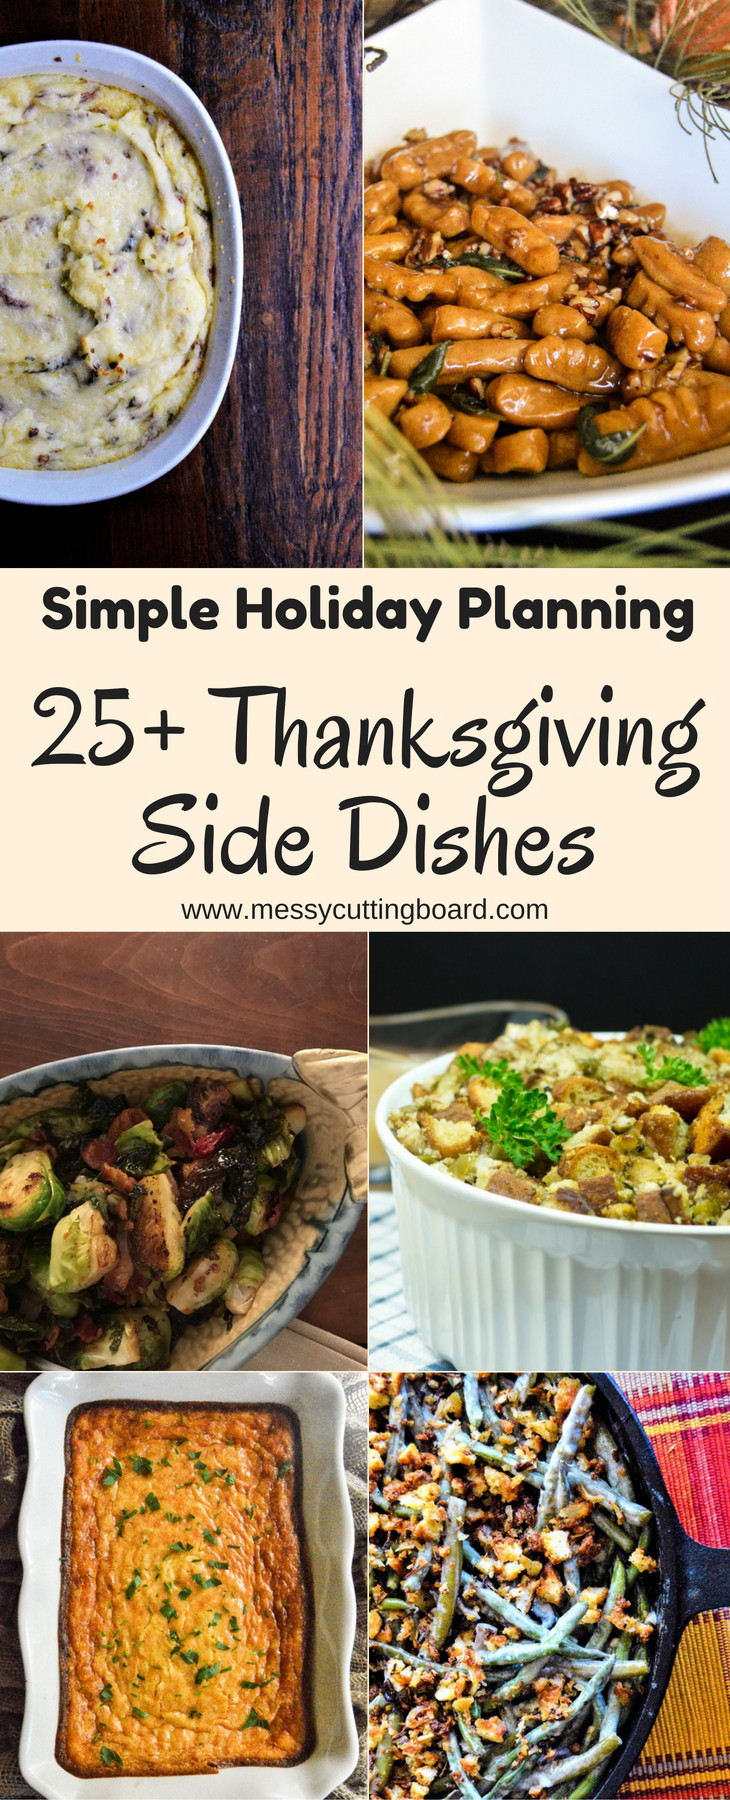 Gravy Thanksgiving Side Dishes
 The Ultimate List of Thanksgiving Side Dishes Messy